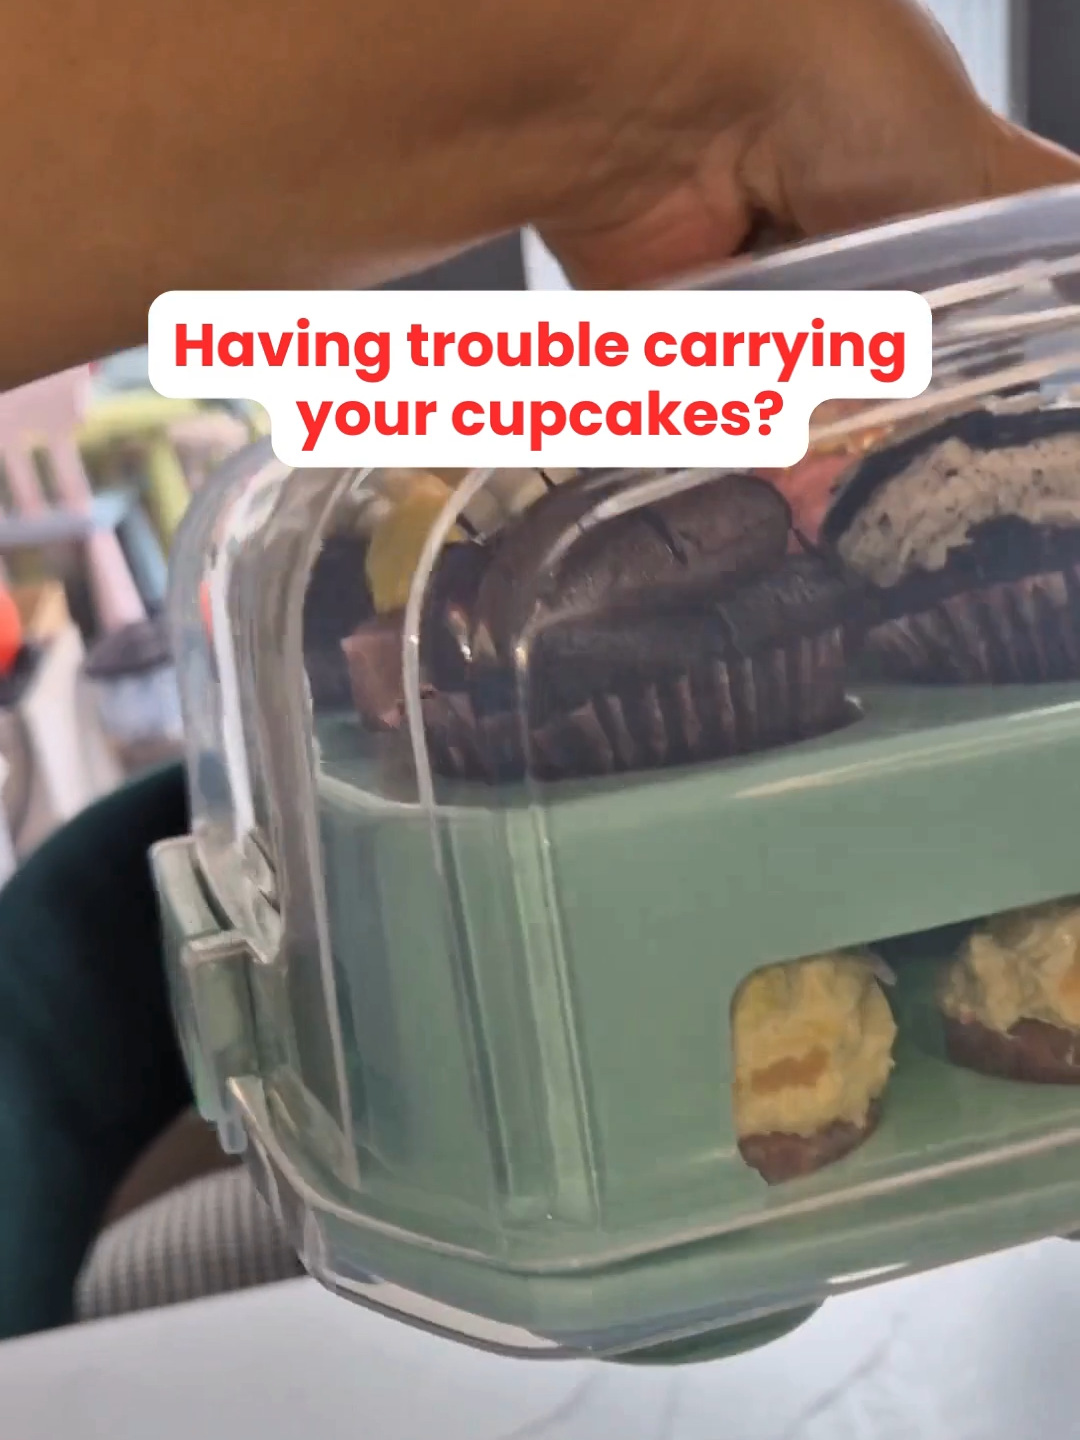 Our Ultimate 2 Layer Cupcake Carrier: Secure, Stylish, and Simply Perfect!   🔒 Secure Snaps: Ensures your treats stay safe on the go.   🍽️ Food & Dishwasher Safe: BPA-free and easy to clean.   💡 Fashionable Design: Clear lid, vibrant colors, and a patented touch.   🎂 Deep Cupcake Holders: Keeps cupcakes secure even on bumpy rides.   Transport your treats with confidence! 🌟   Shop now via link in bio.    #Treaterrific #treaterrific #amazonbuy ##kitchenstyleideas #kitchenhacks #amazonfind #kitchenfind #treaterrificday #haveatreaterrificday #CupcakeCarrier #SecureAndStylish #TransportWithConfidence #CupcakeCarrier #bakinghack #baking #funbaking